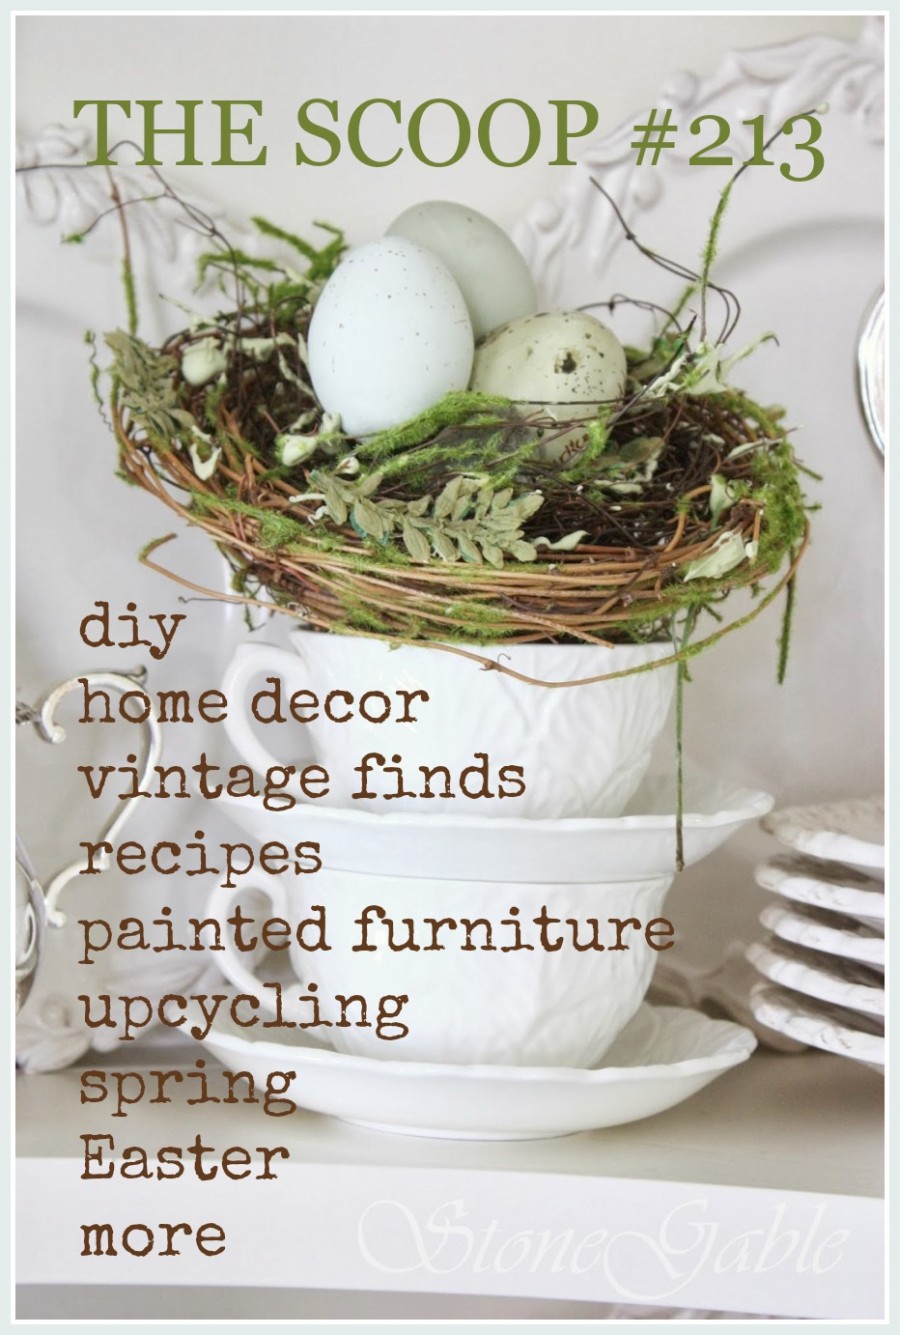 THE SCOOP #213. Hundreds of ideas for home and garden!